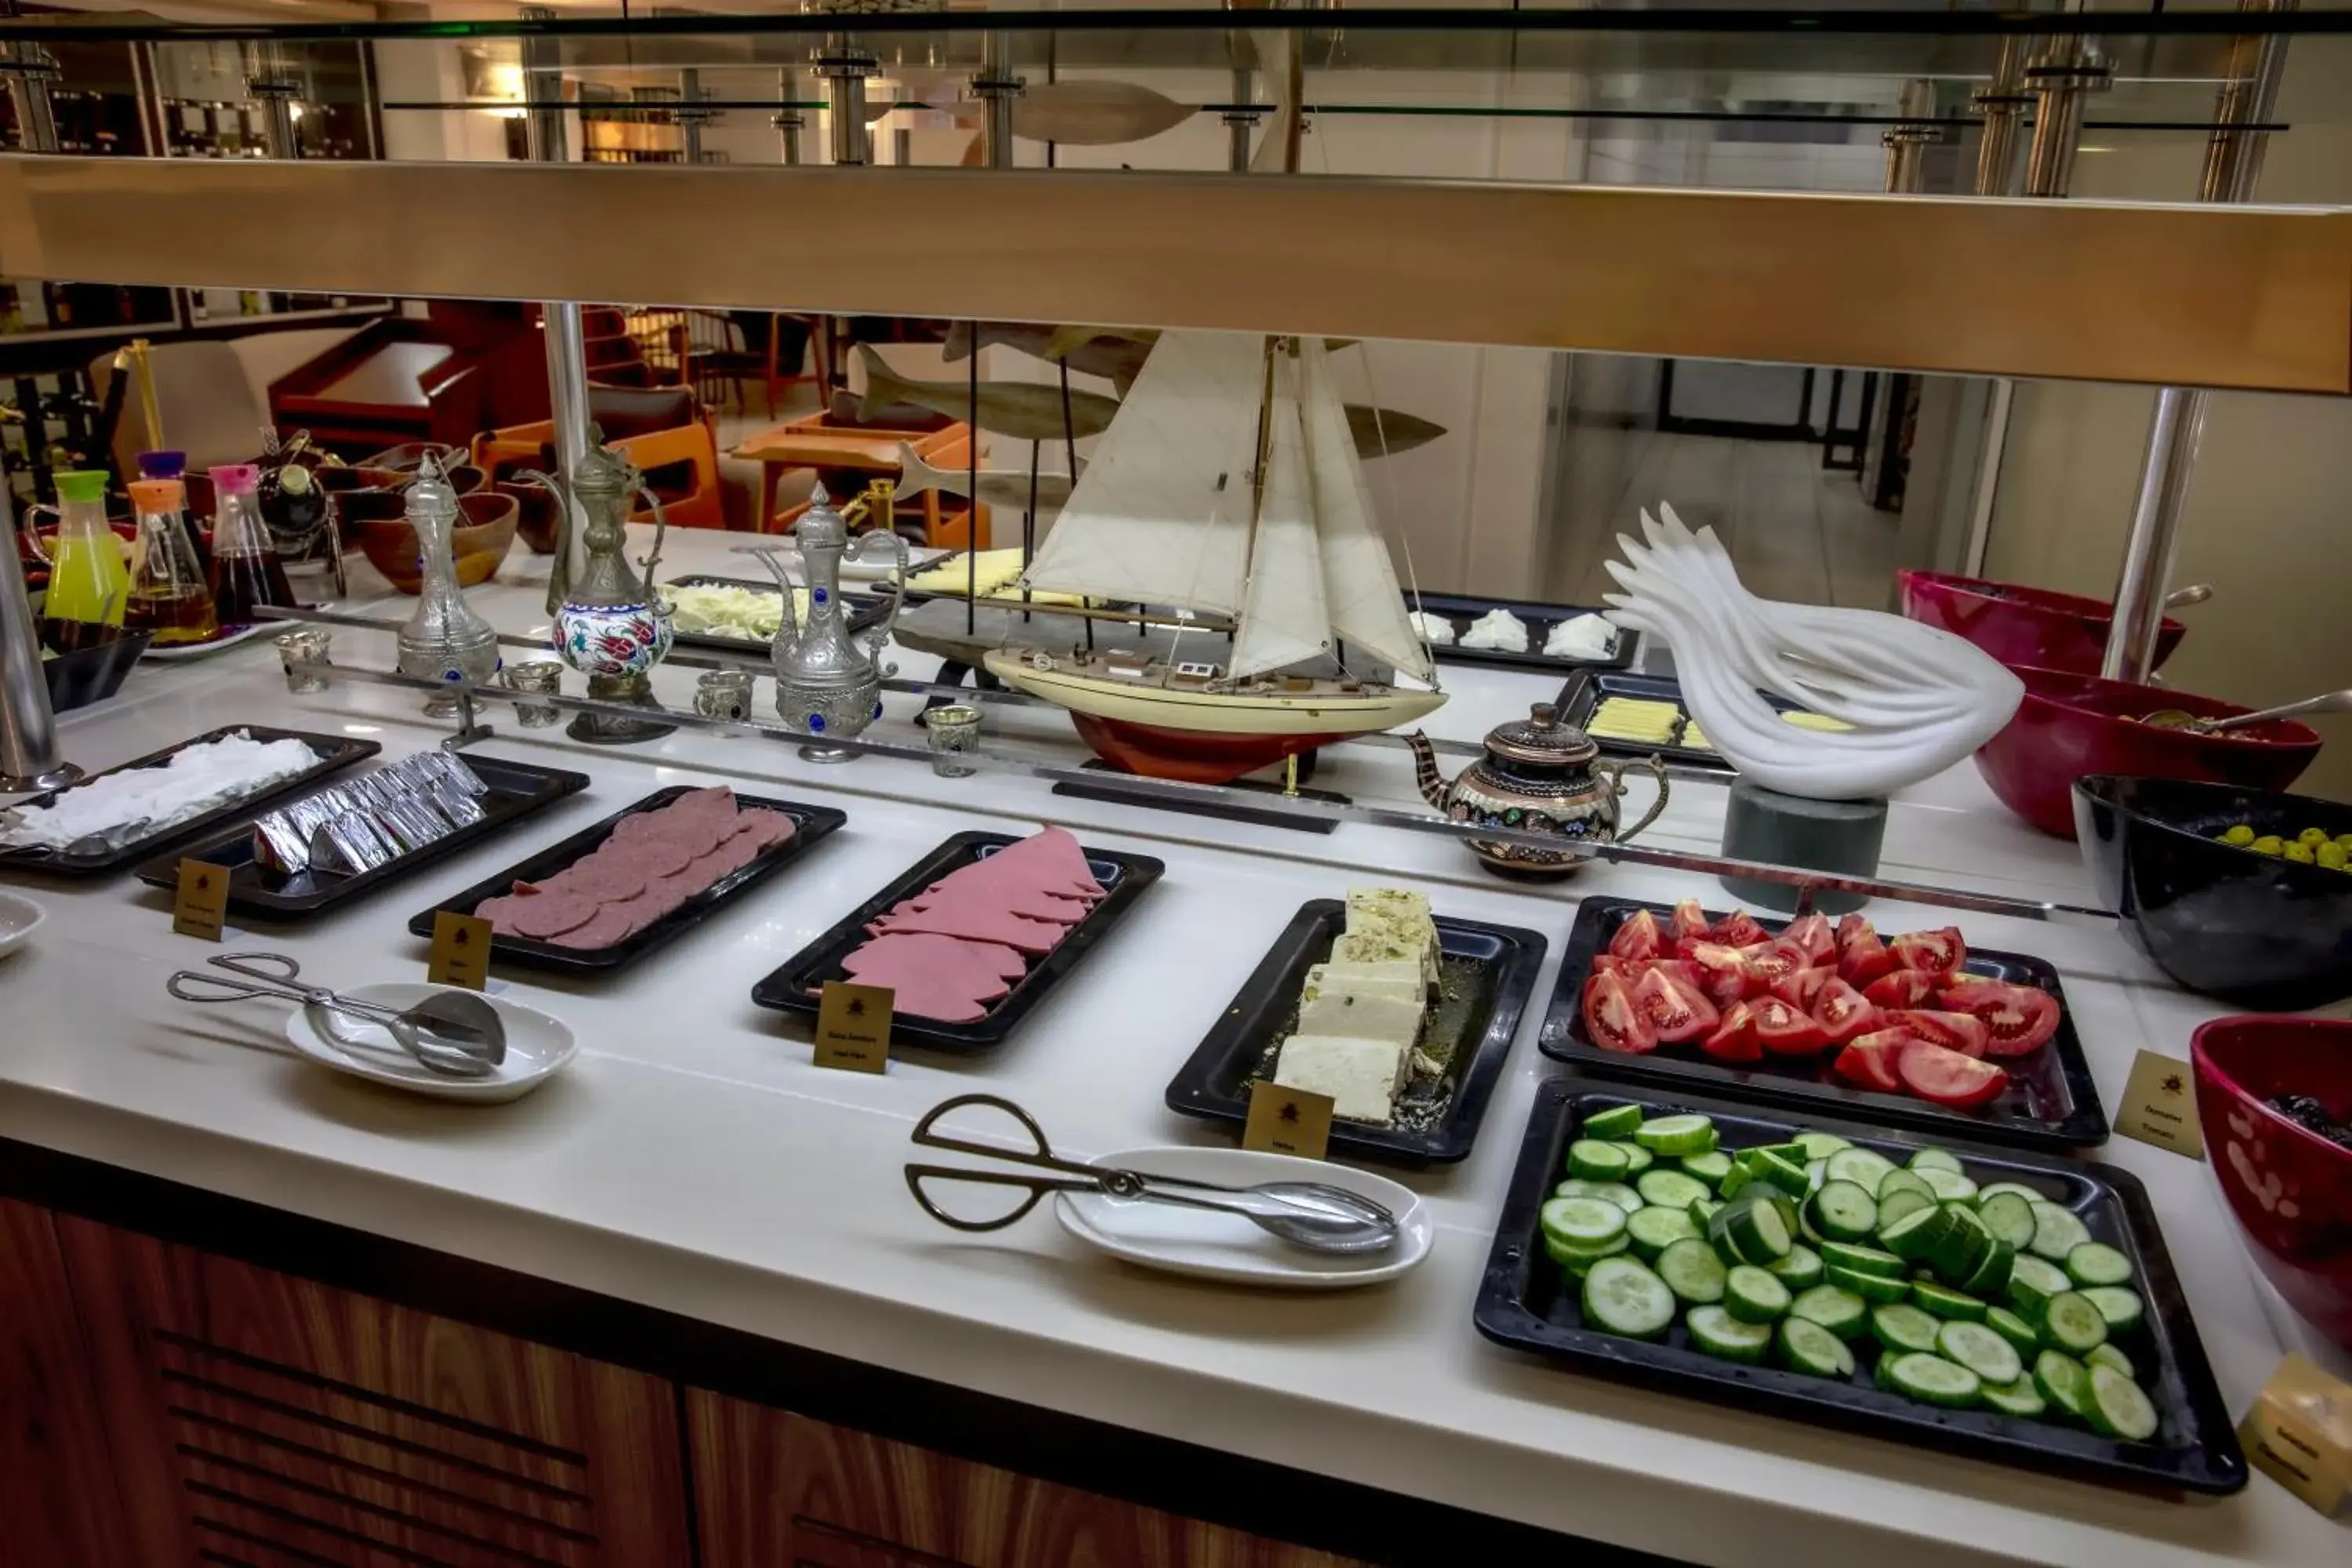 Buffet breakfast in Dosso Dossi Hotels Old City